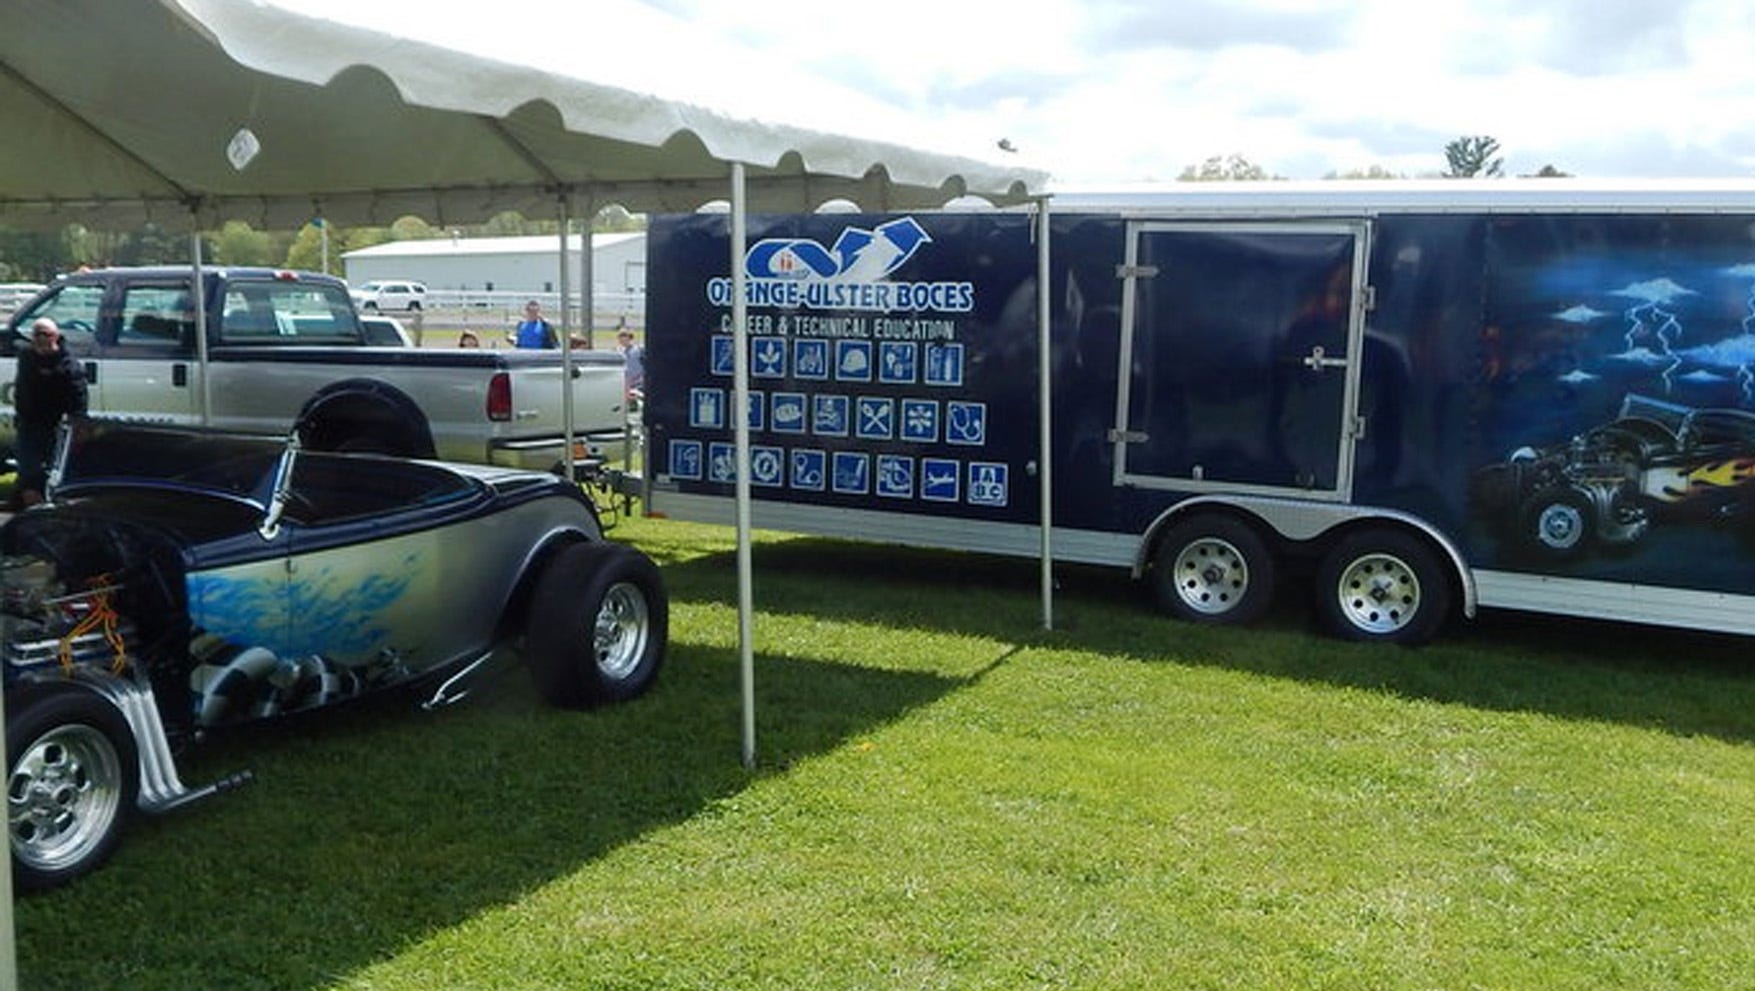 47 years of the Rhinebeck Car Show and still going